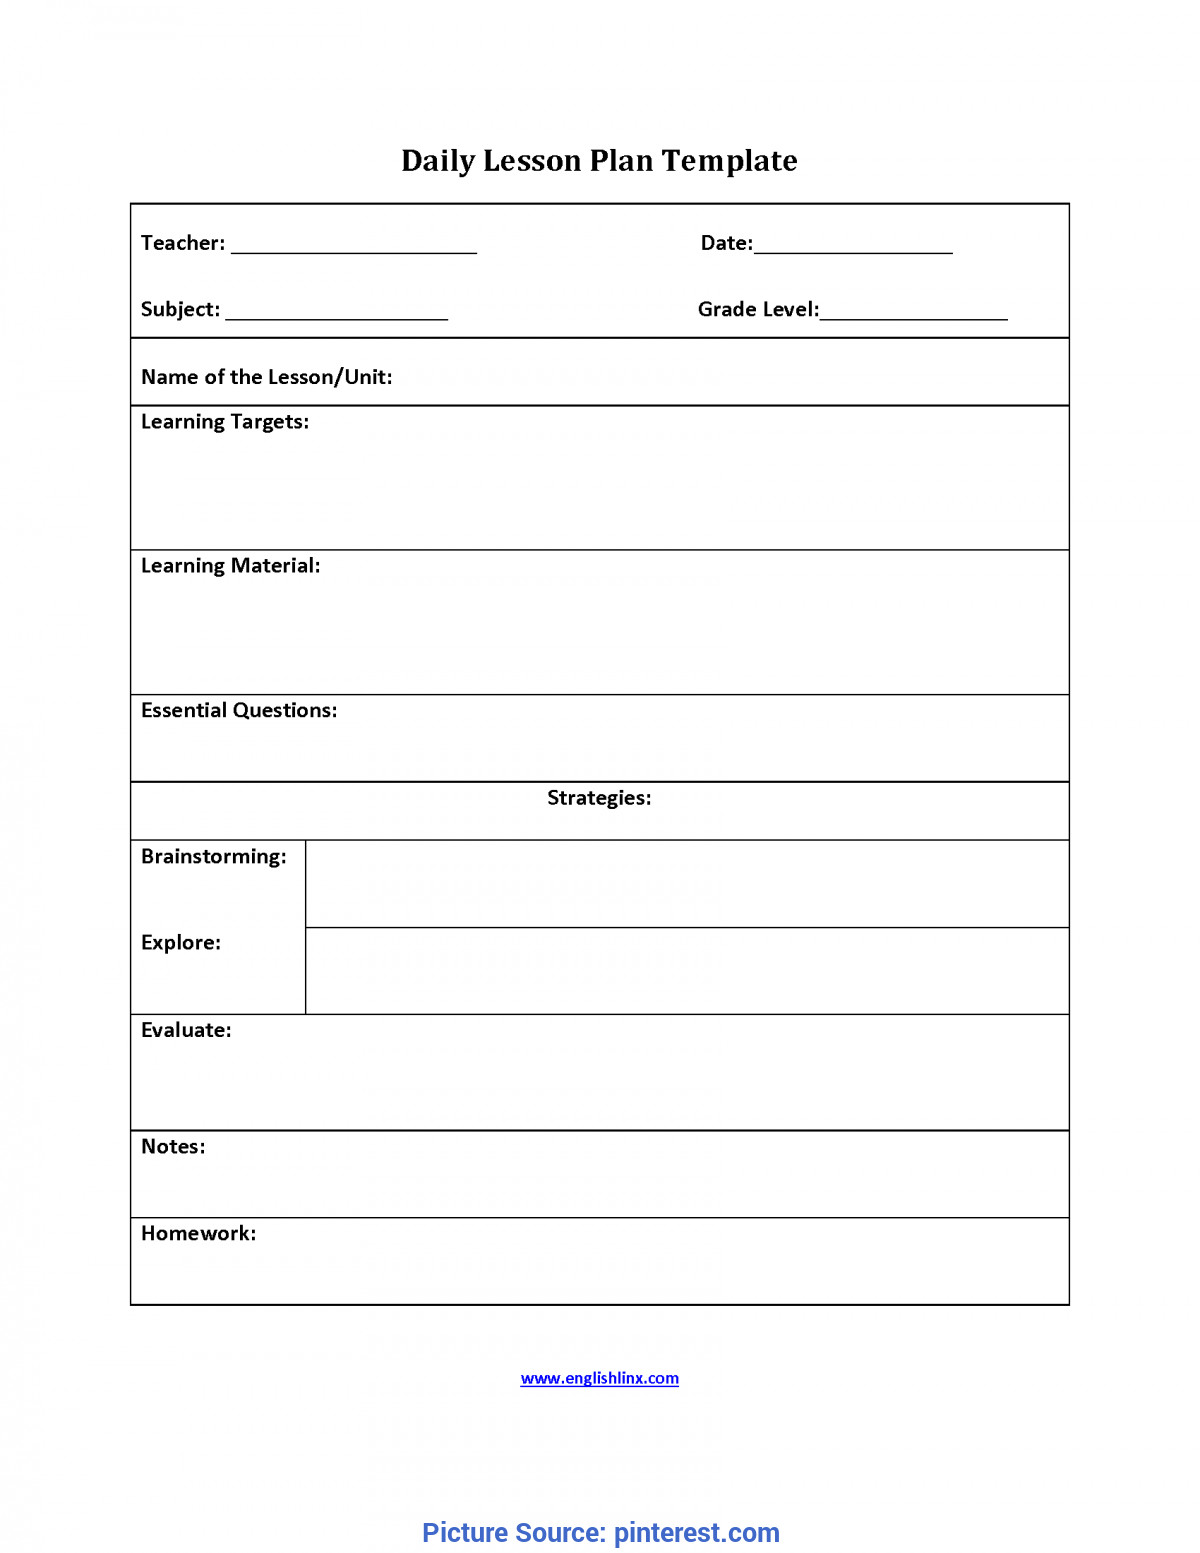 Small Group Lesson Plan Template Best Small Group Instruction Template Small Group Lesson